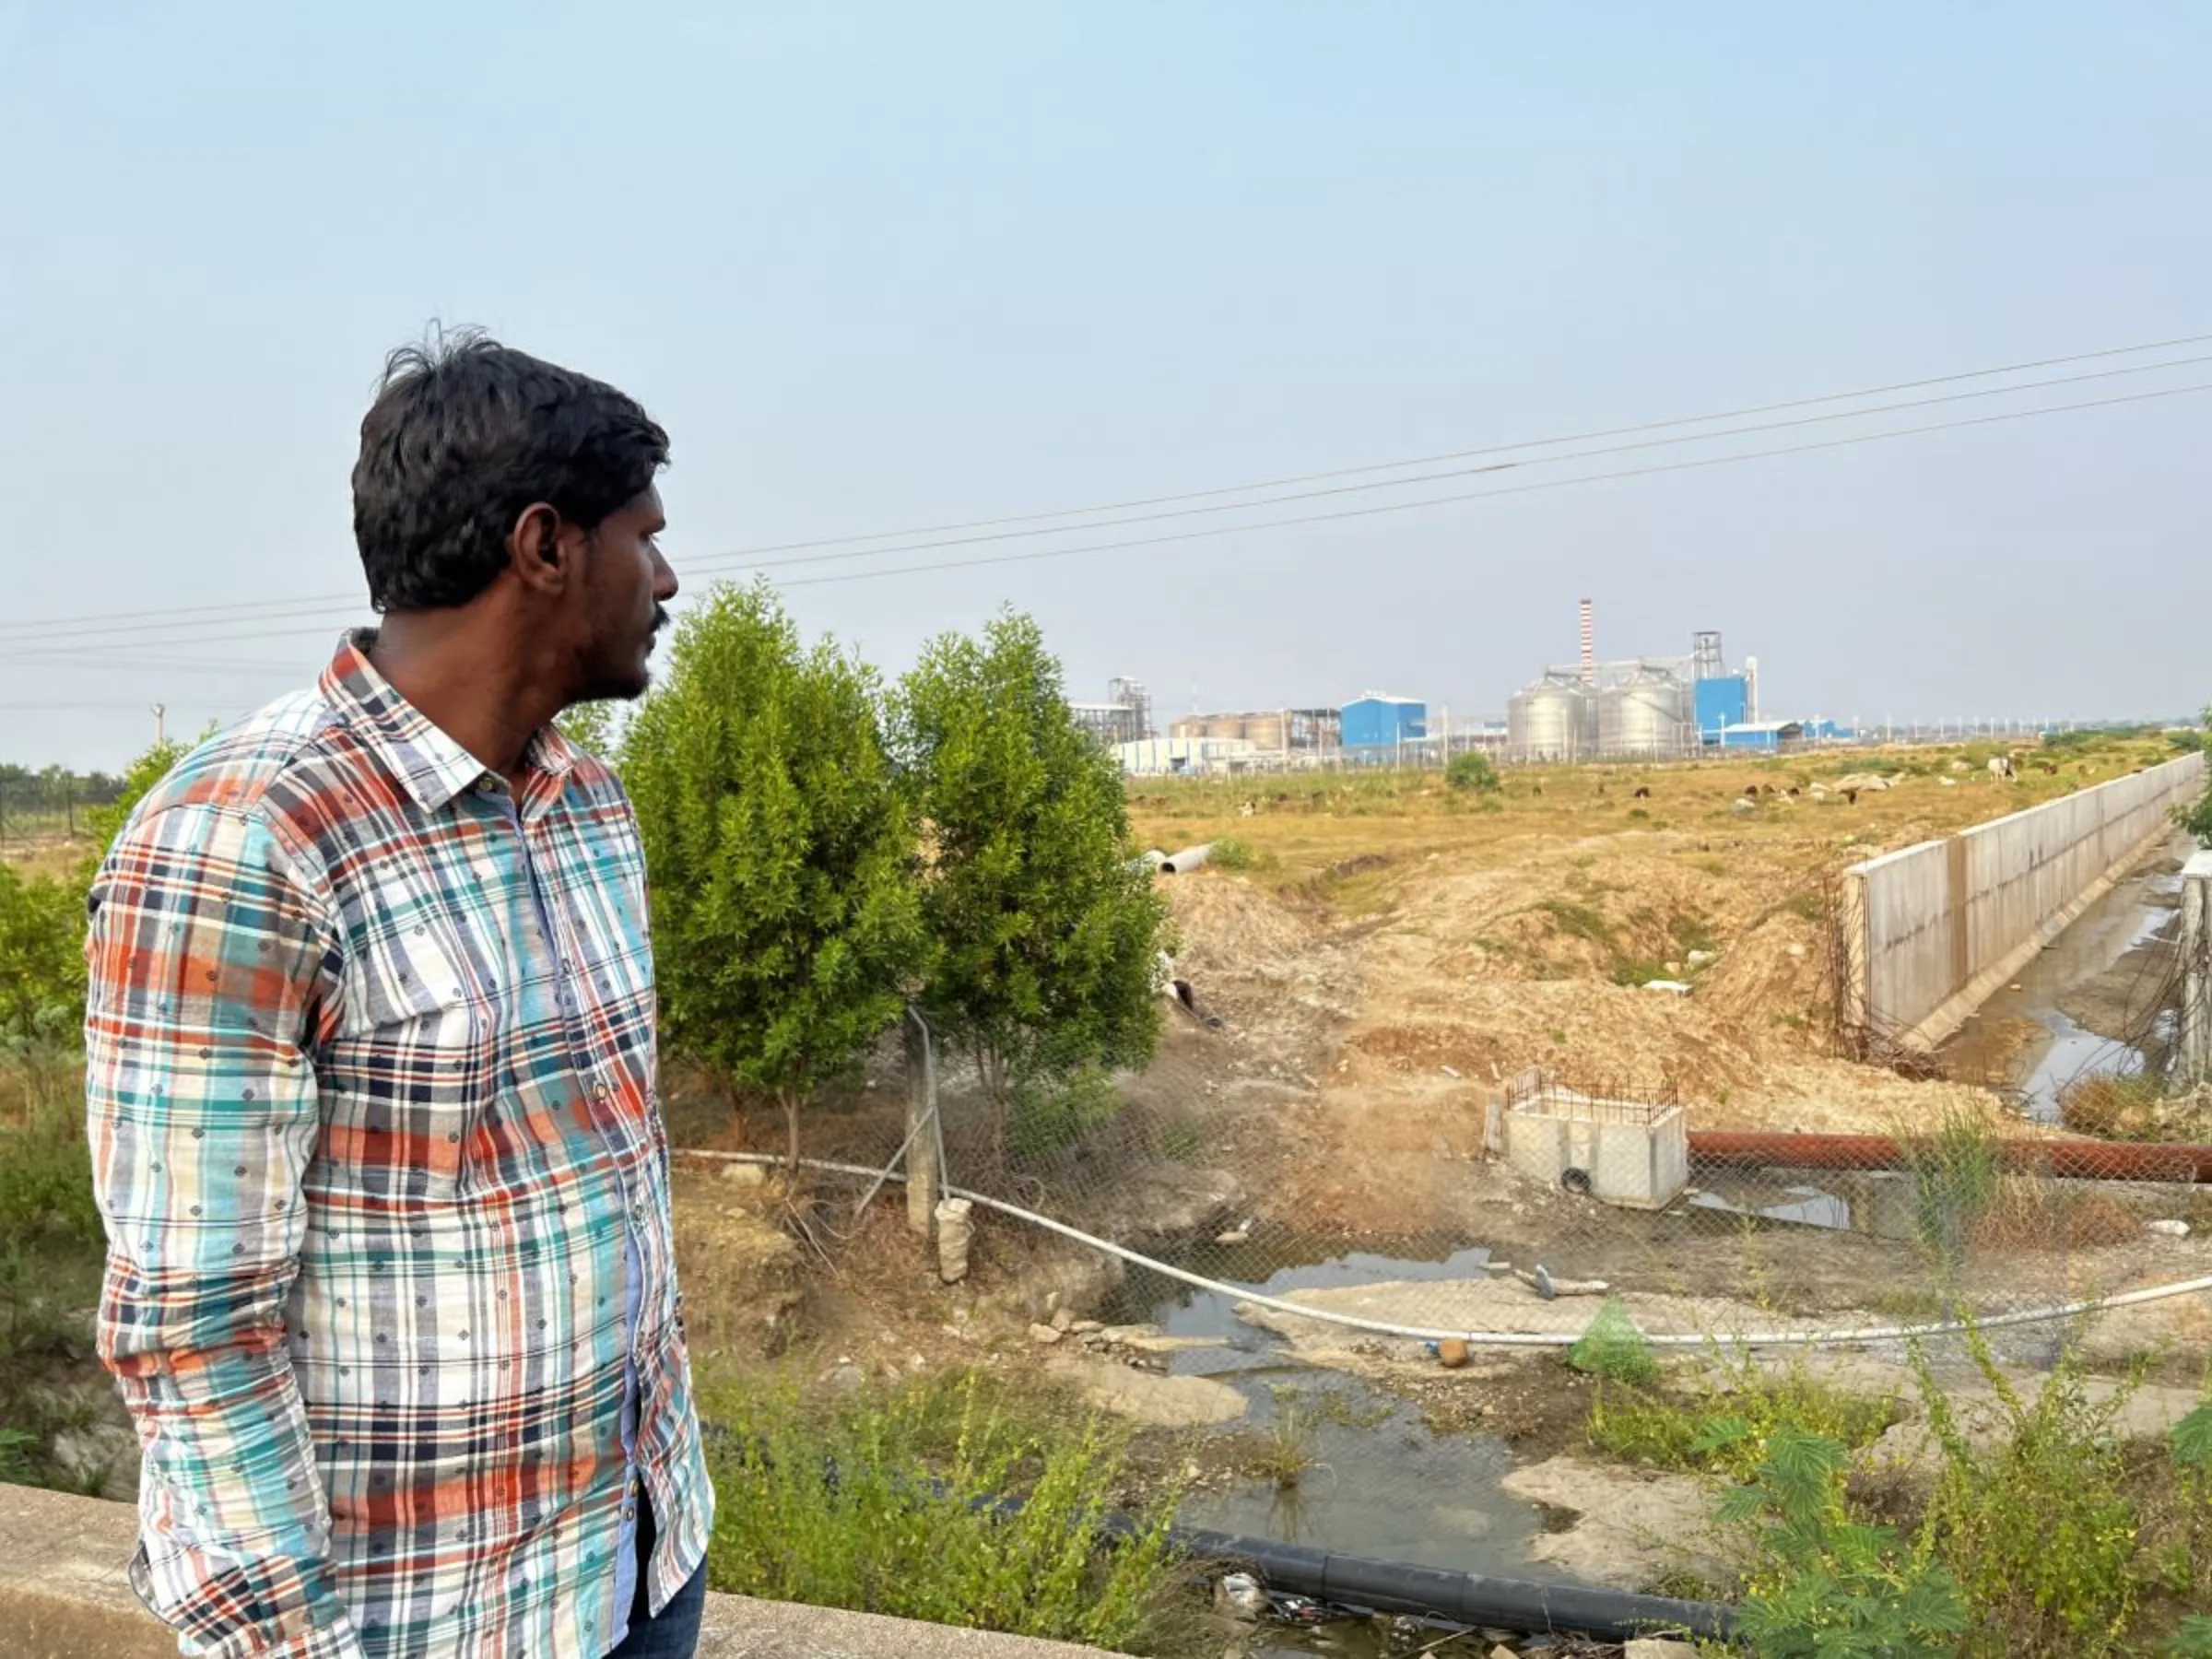 Sugunakar Reddy, a resident of Chittanur village, looks at a new ethanol plant which he says is polluting the stream that sustains his village in Telangana state, India, October 17, 2023